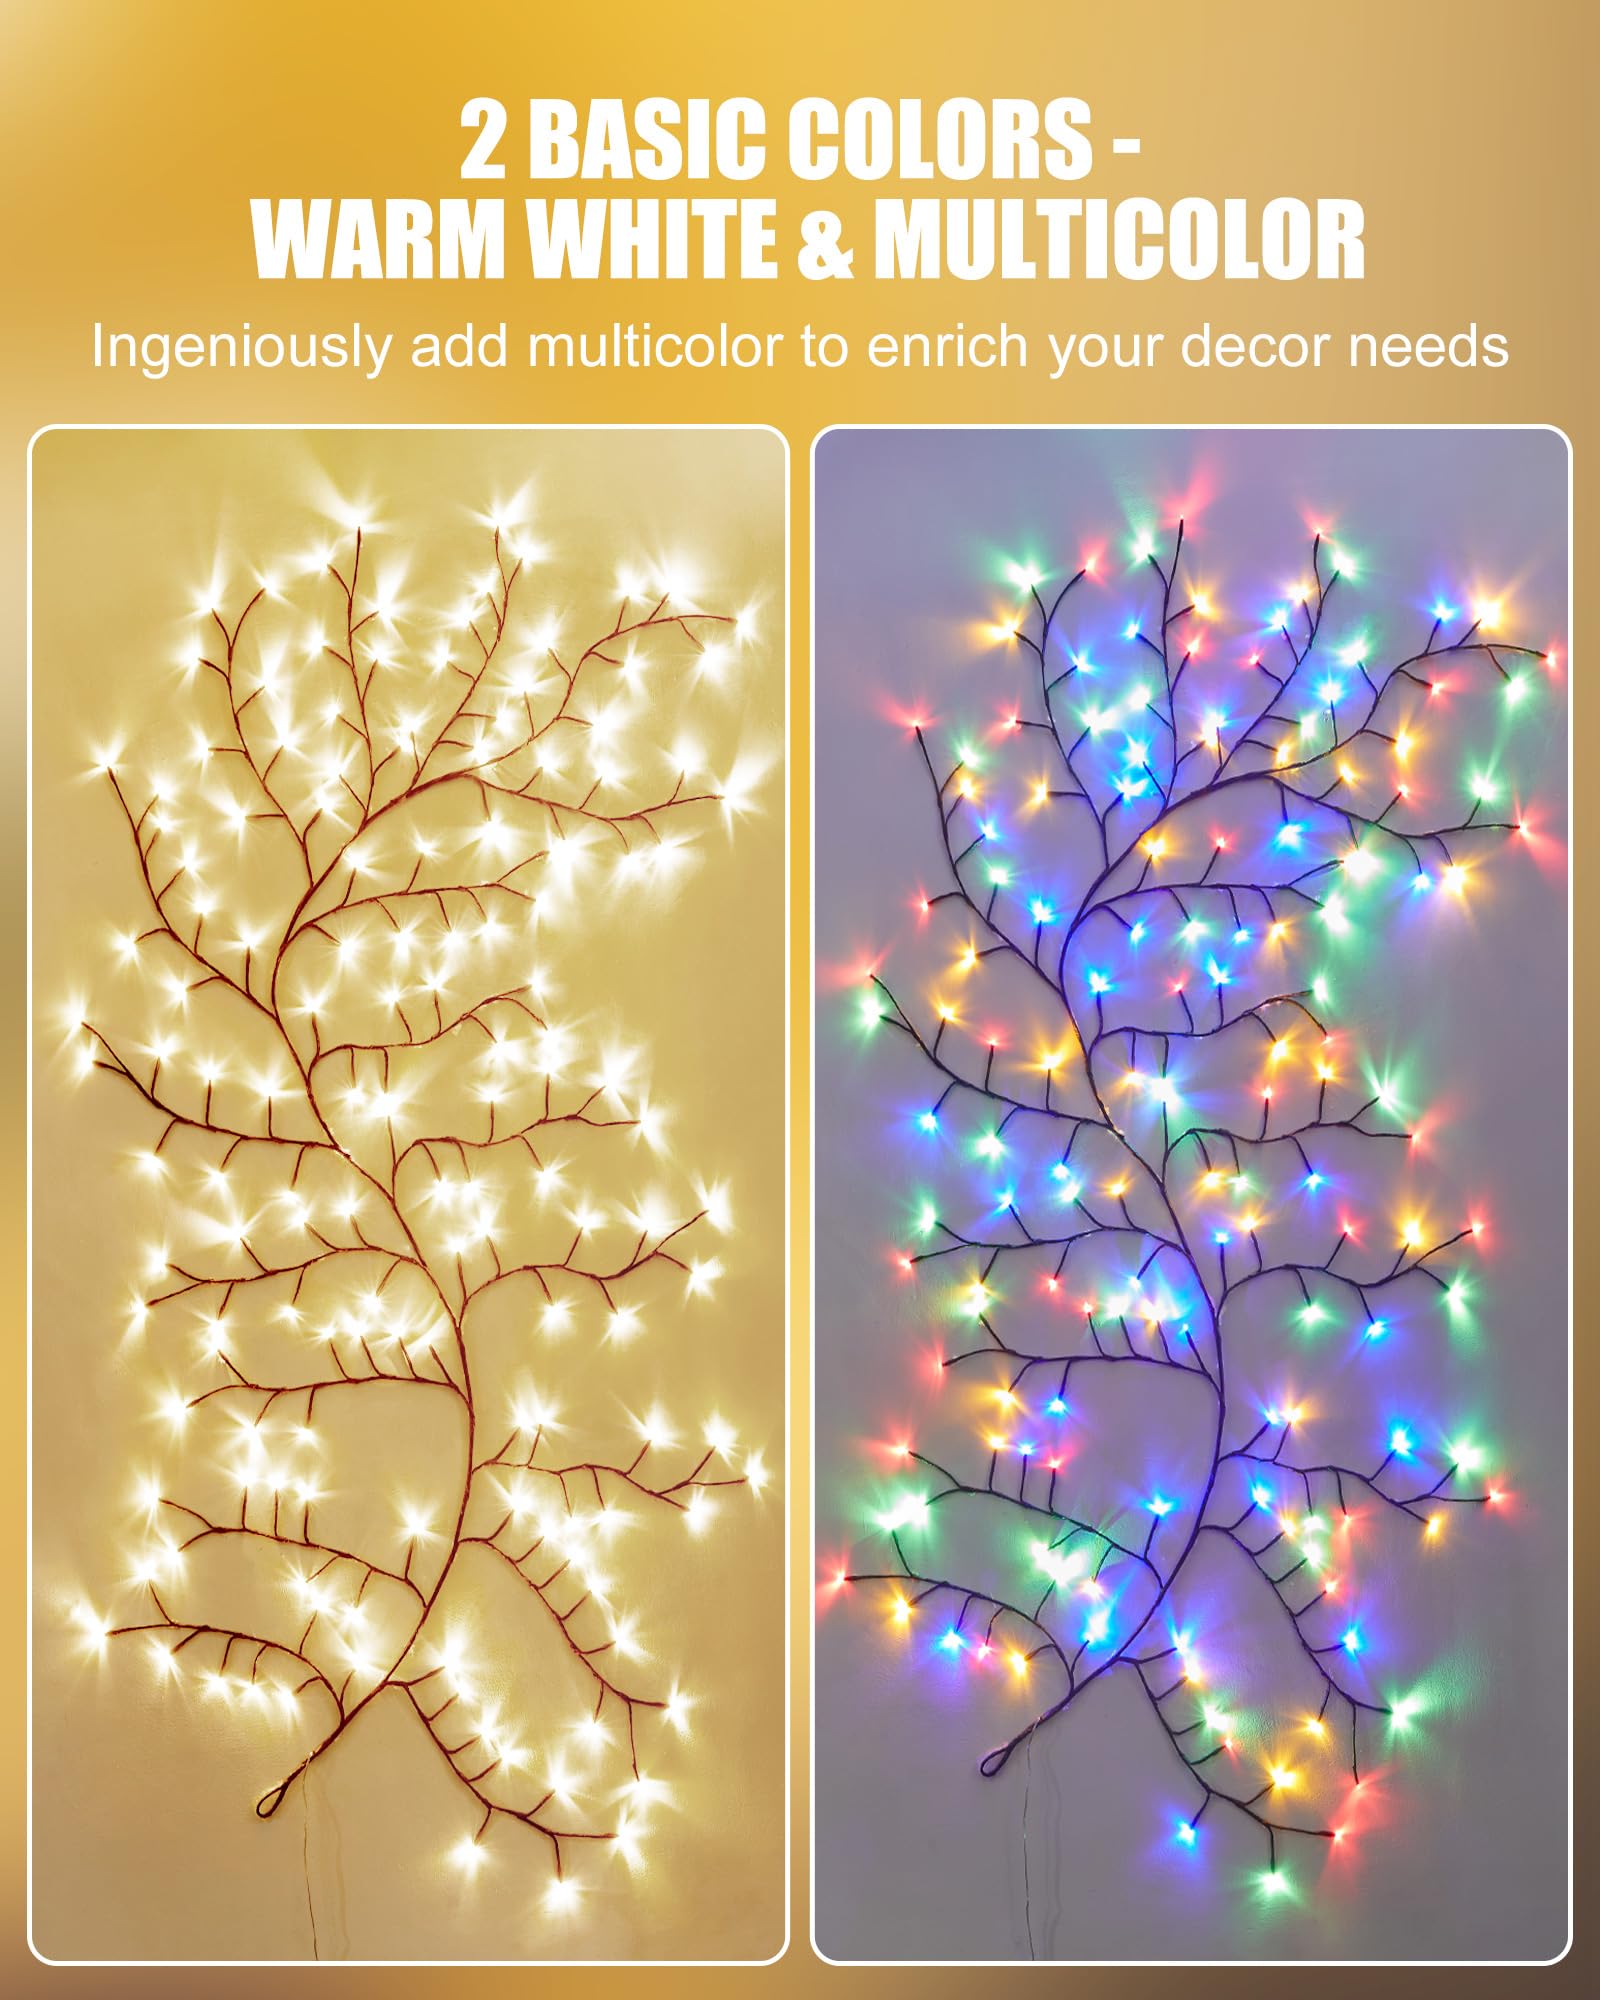 1 x 7.5 Feet / 18 Branches / 144 LED